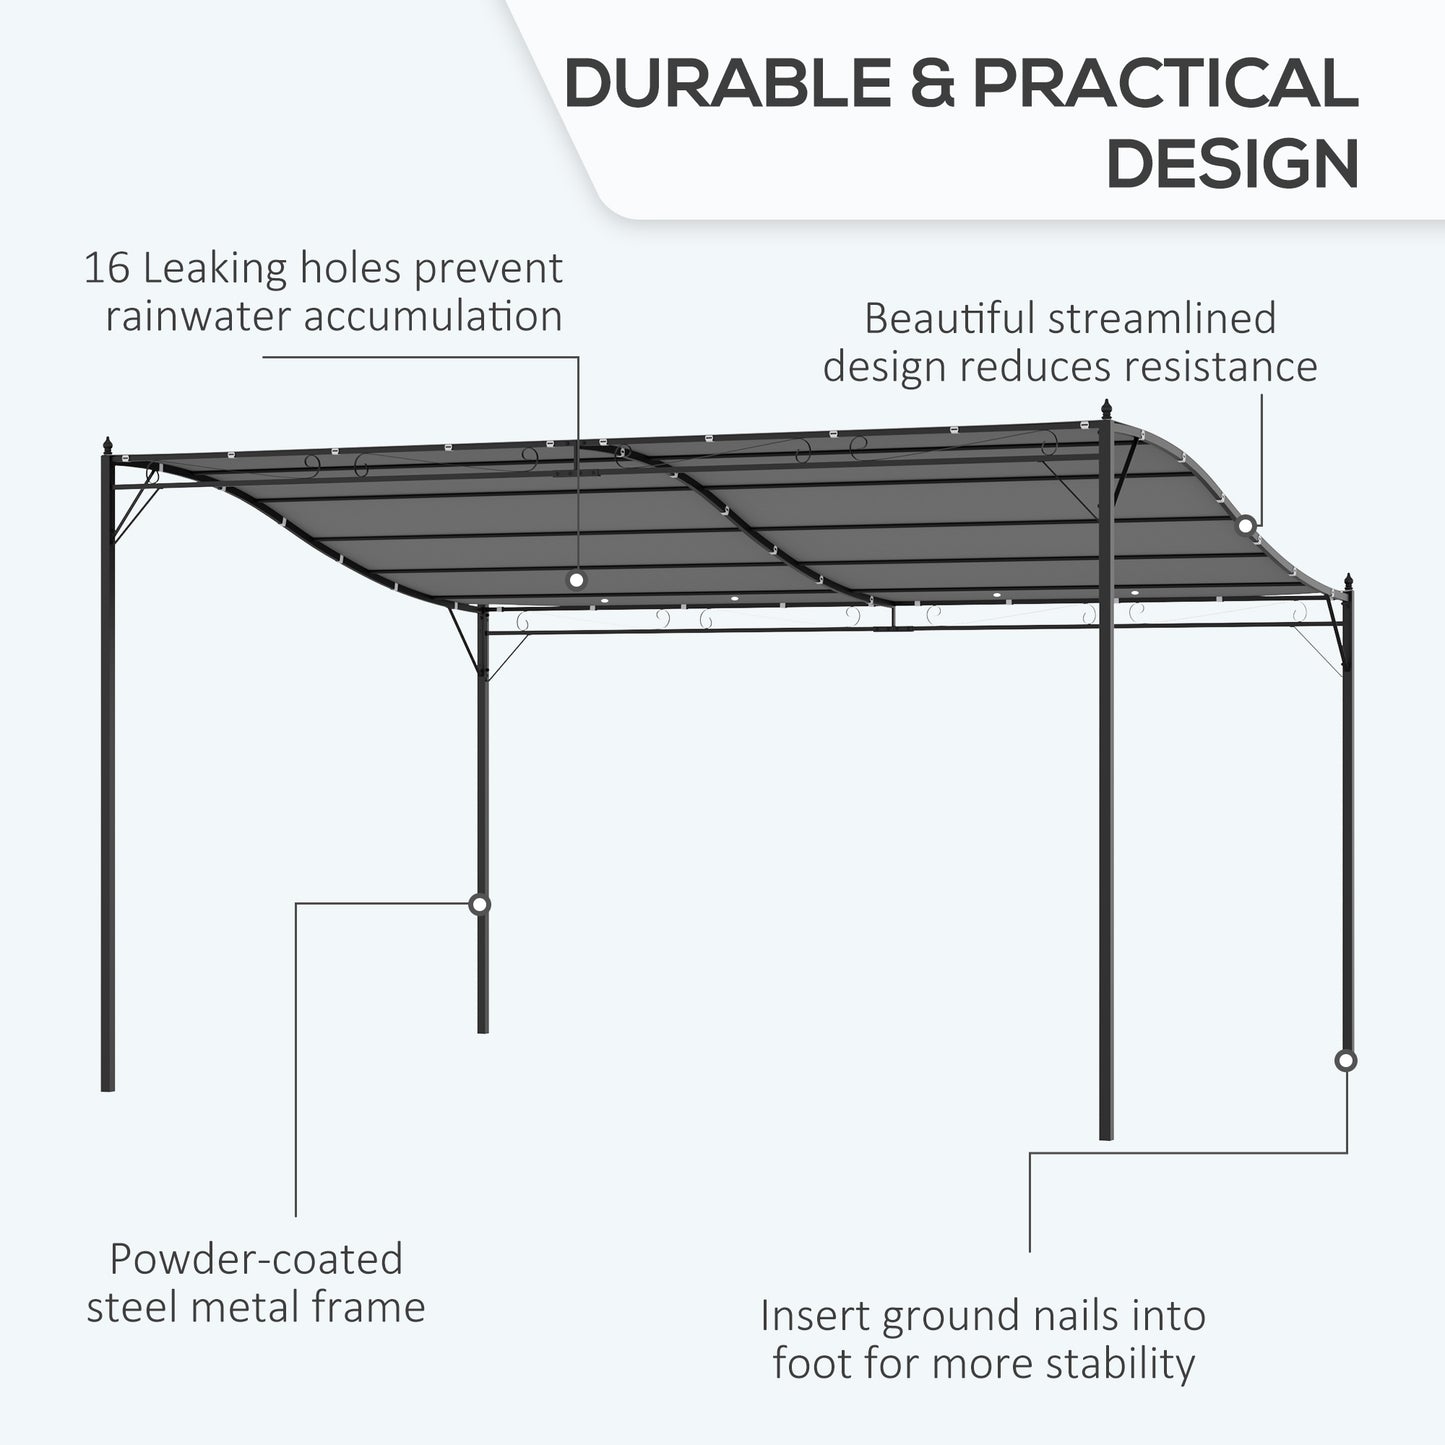 Outsunny 4 x 3 Meters Canopy Metal Wall Gazebo Awning Garden Marquee Shelter Door Porch - Grey